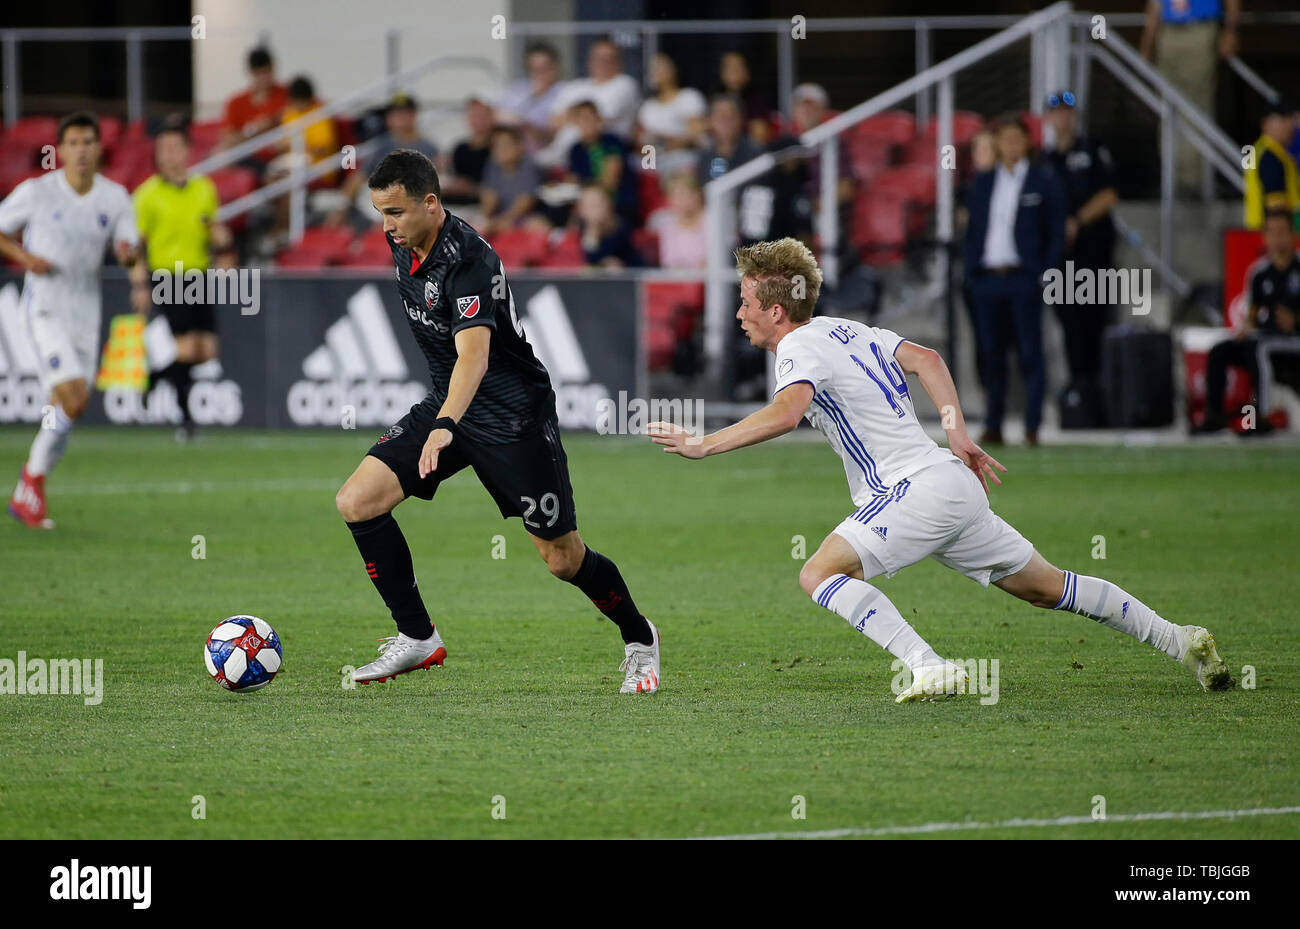 Washington DC, USA. 1st June, 2019. San Jose Earthquakes Midfielder (14) Jackson Yueill loses his footing as he tries to defend D.C. United Midfielder (29) Leonardo Jara during an MLS soccer match between the D.C. United and the San Jose Earthquakes at Audi Field in Washington DC. Justin Cooper/CSM/Alamy Live News Stock Photo